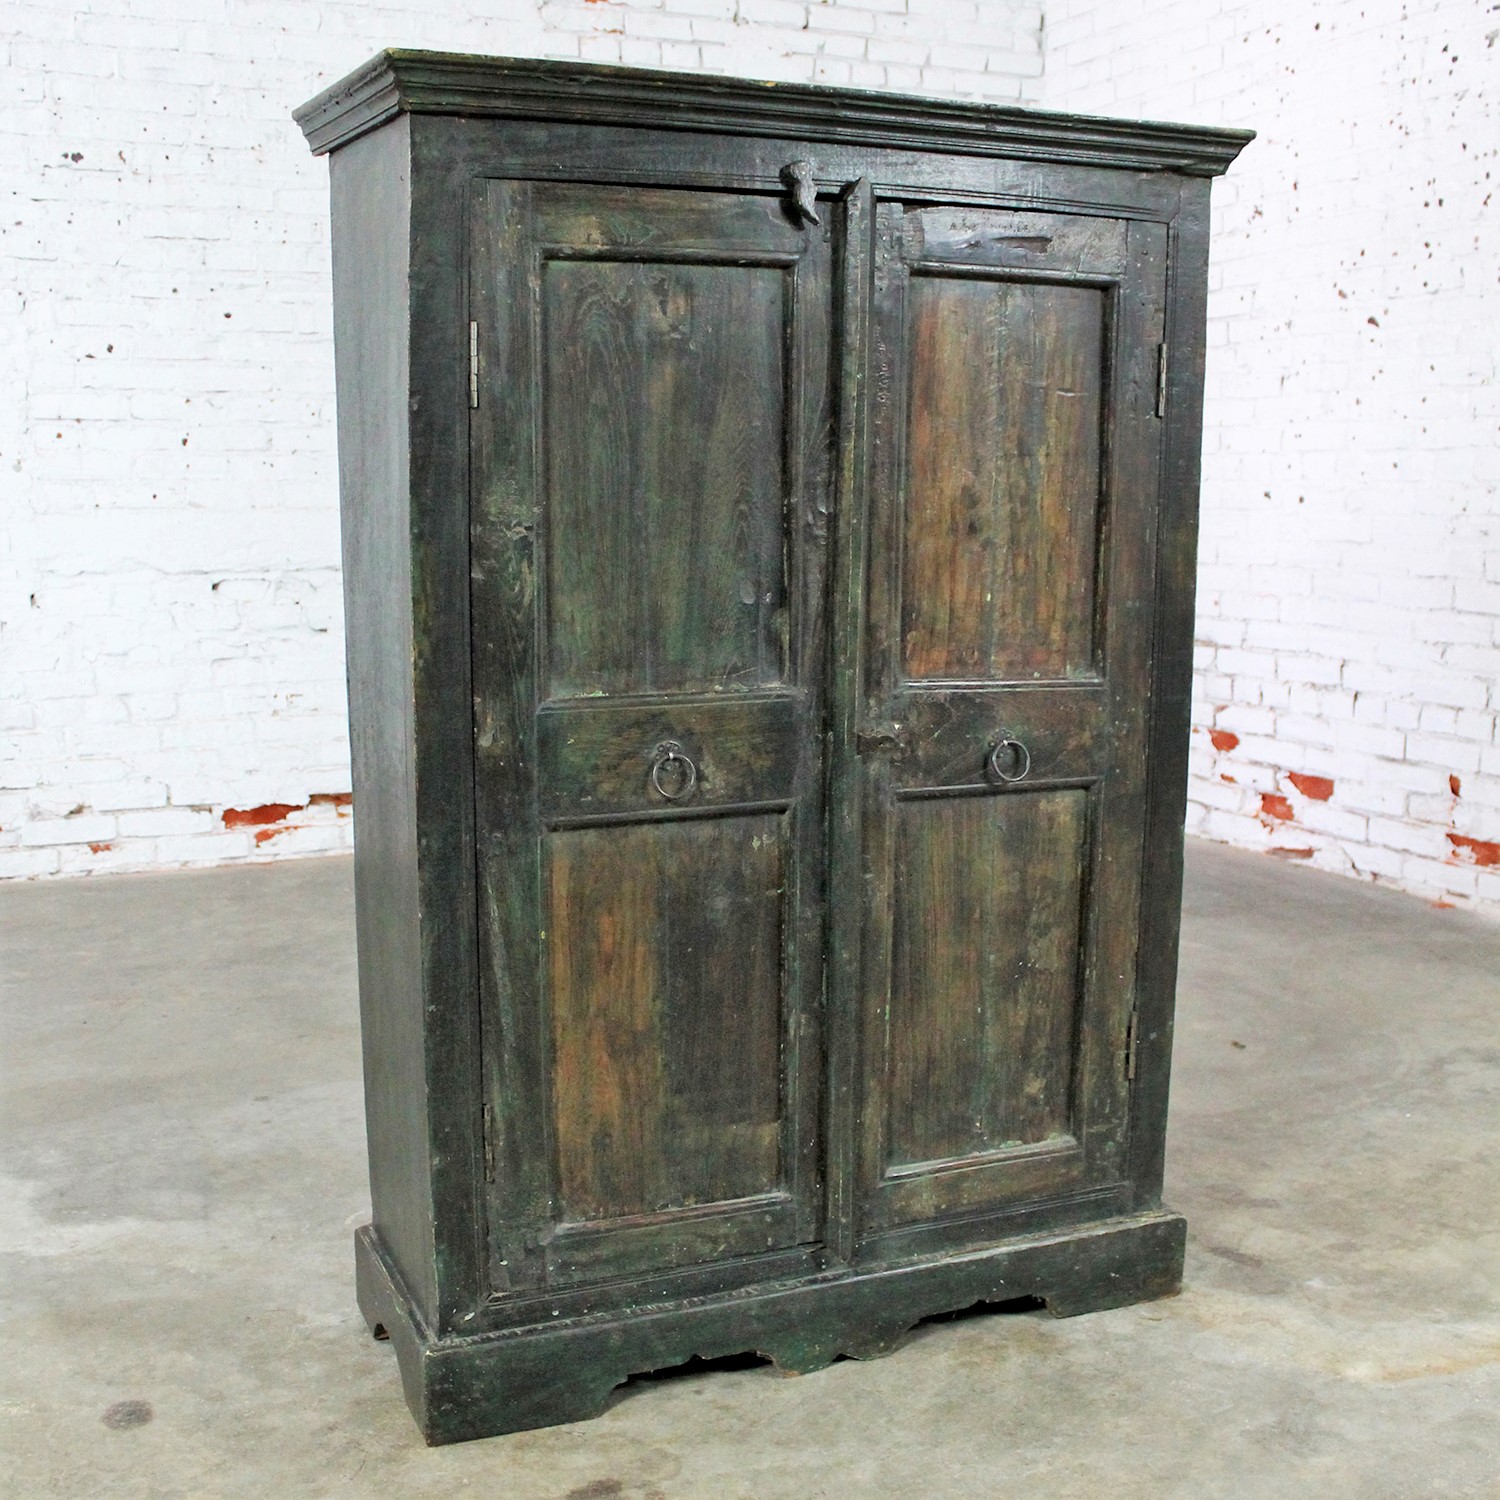 Rustic Primitive Cupboard Storage Cabinet with Distressed Paint